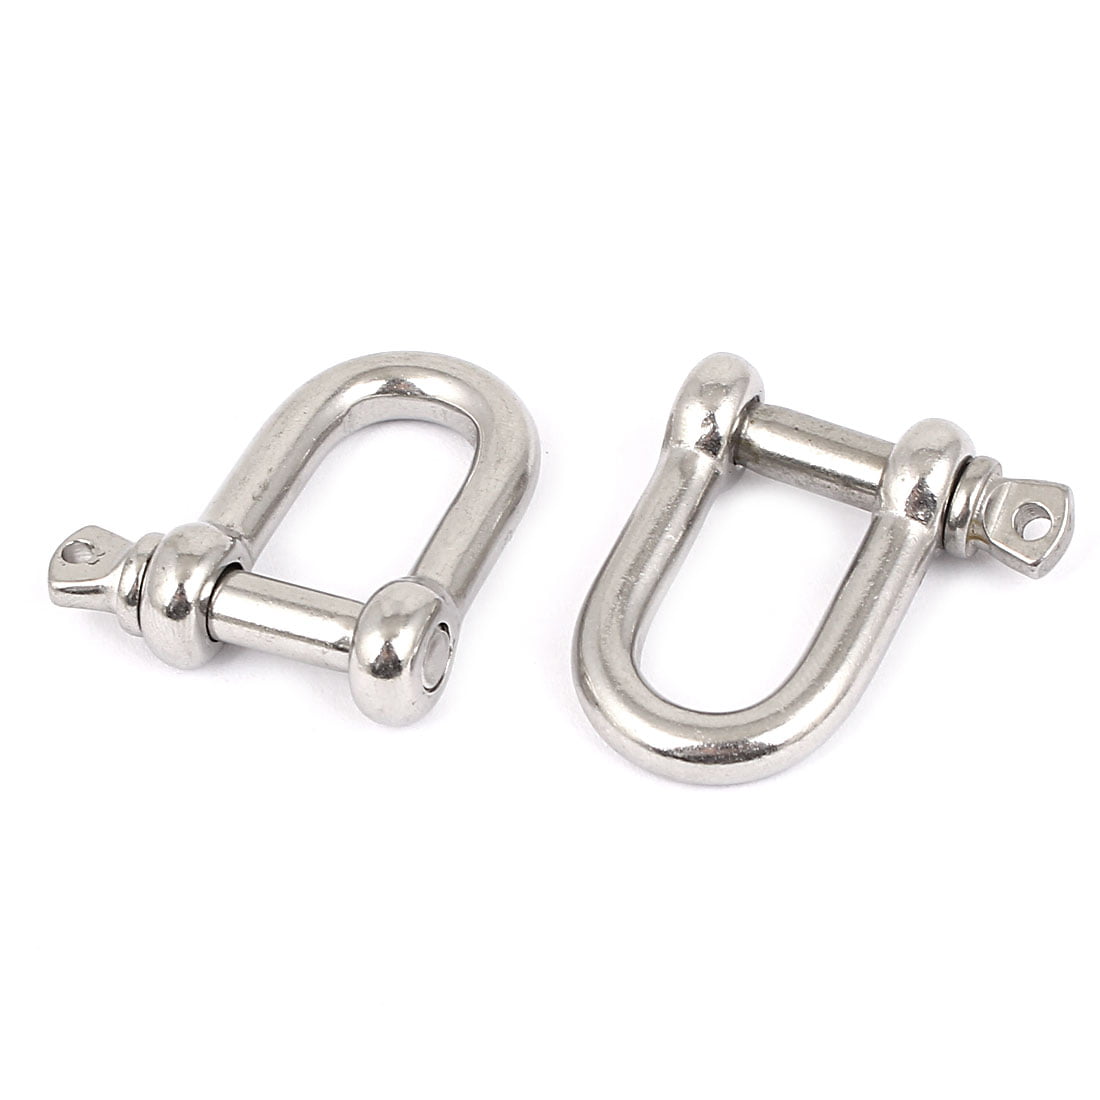 Stainless Steel Wire Rope Fastener Bow D Shackles Silver Tone 4PCS 602451314257 